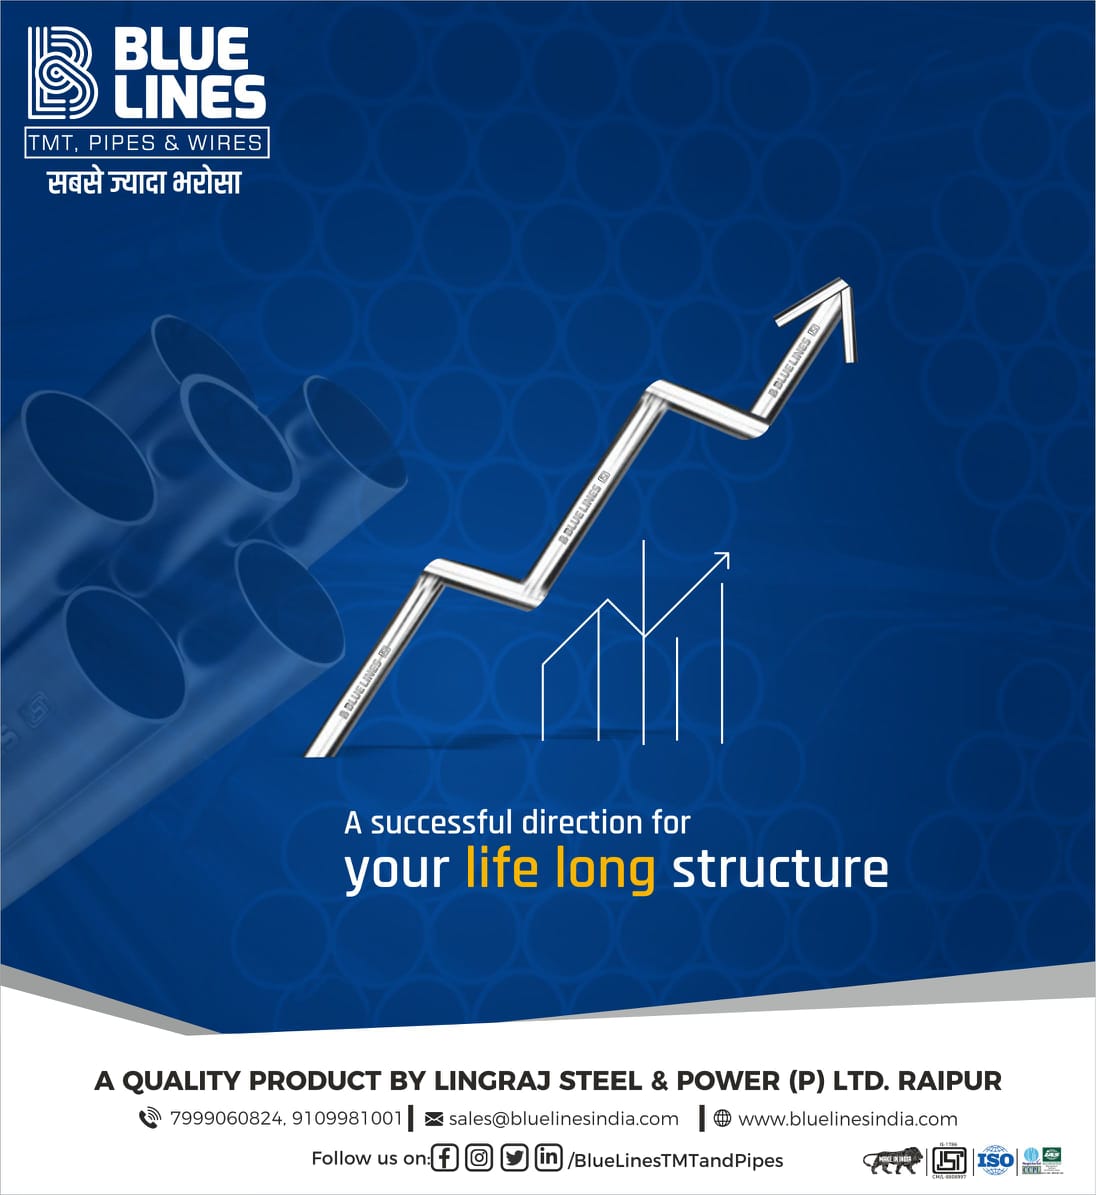 Blue Lines pipes give your construction the superior strength it needs to ensure a successful direction for your life long structure.
#BlueLines #Pipes #LifeLongStructure #SuperiorStrength